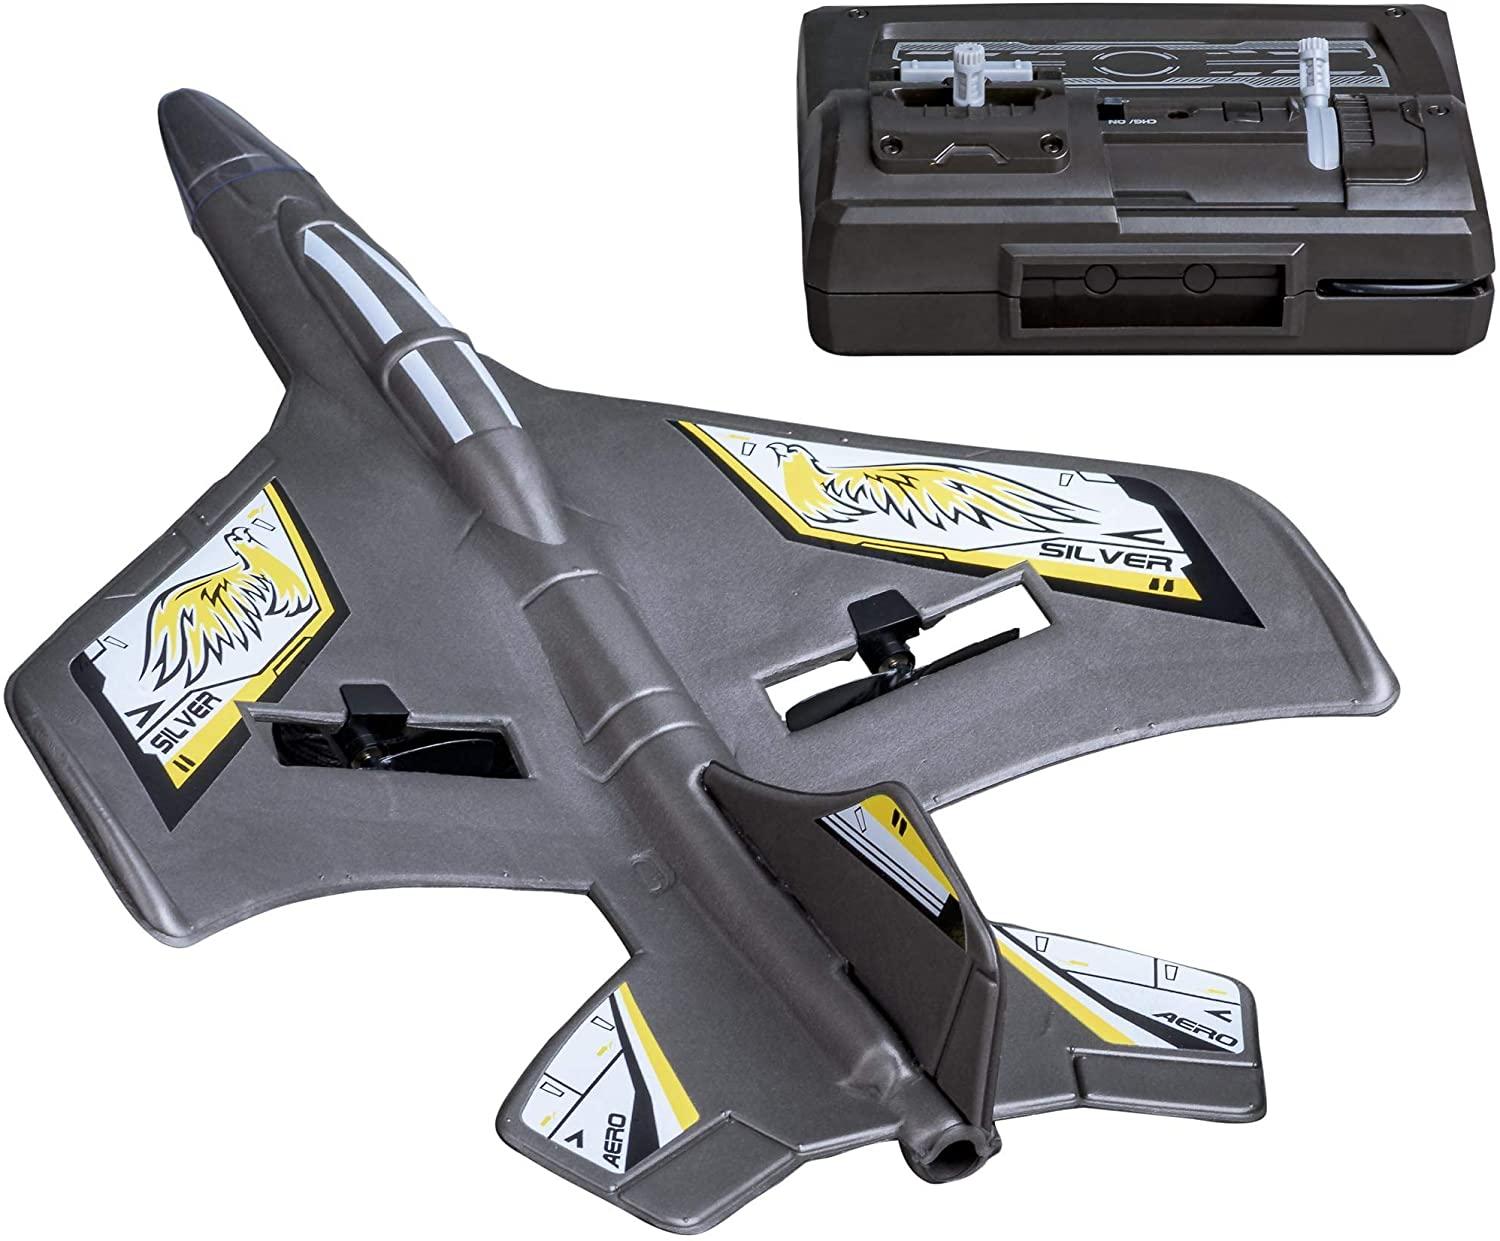 Flybotic Plane:  The Benefits of Flybotic Plane's Adaptable Design